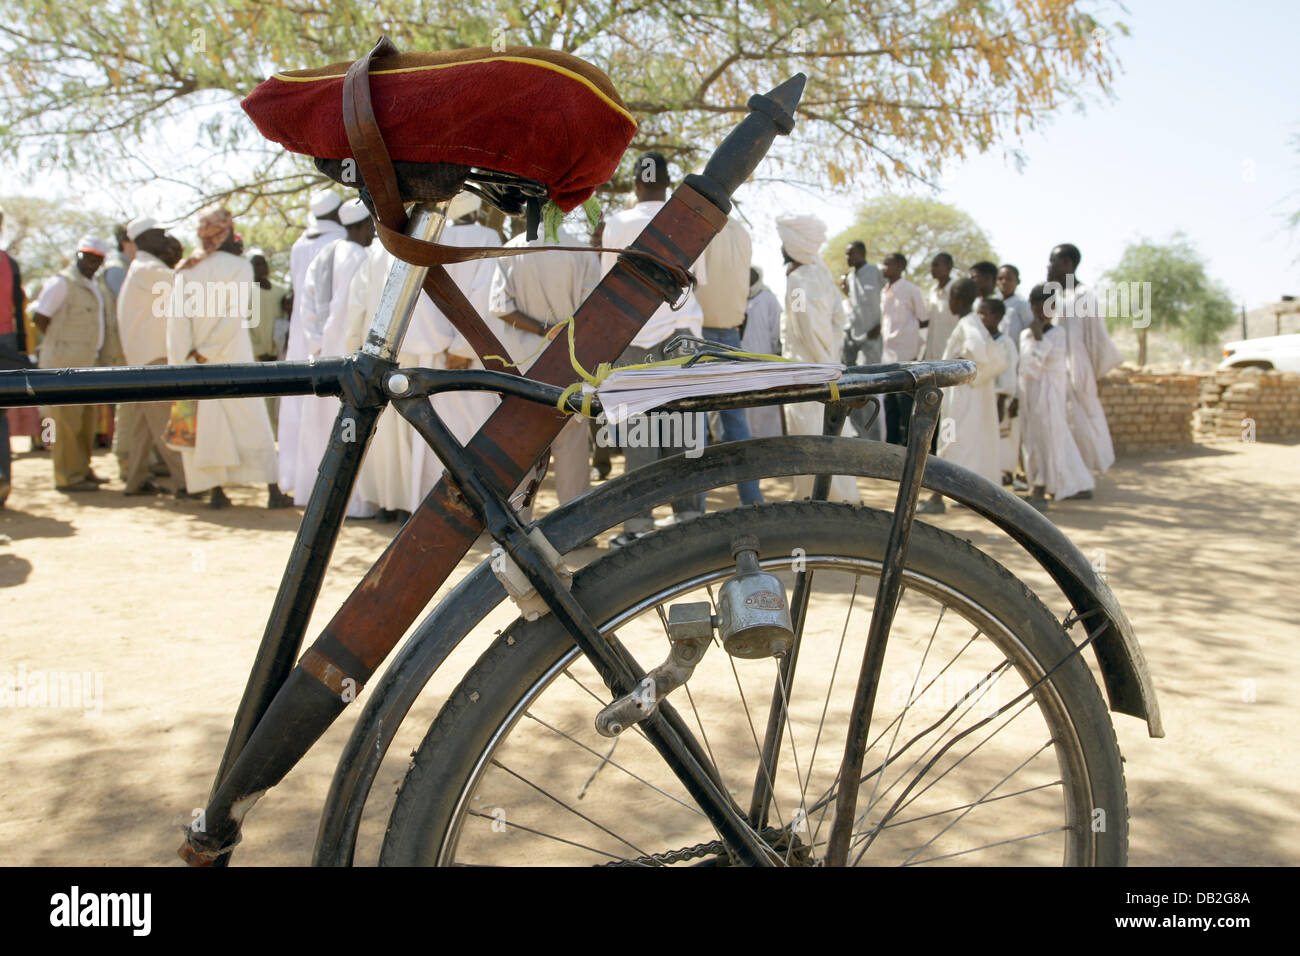 The picture shows a bicycle equipped with both an exercise book and a machete in the village of Buru in Western Dafur, Sudan, 11 December 2007. Photo: Peter Steffen Stock Photo